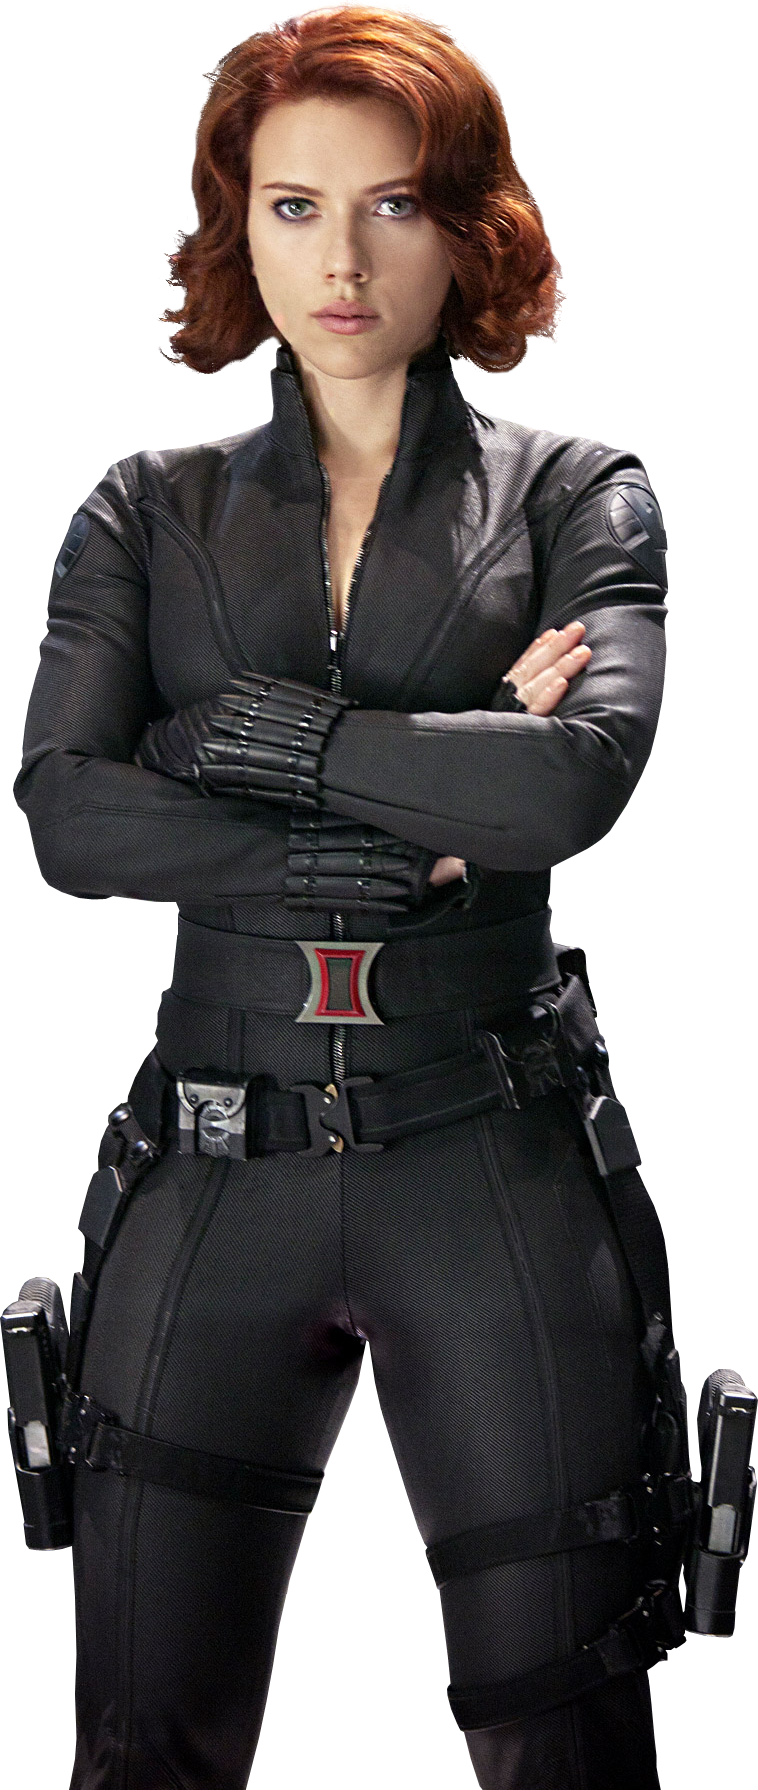 Black Widow Png Image - Black Widow, Transparent background PNG HD thumbnail